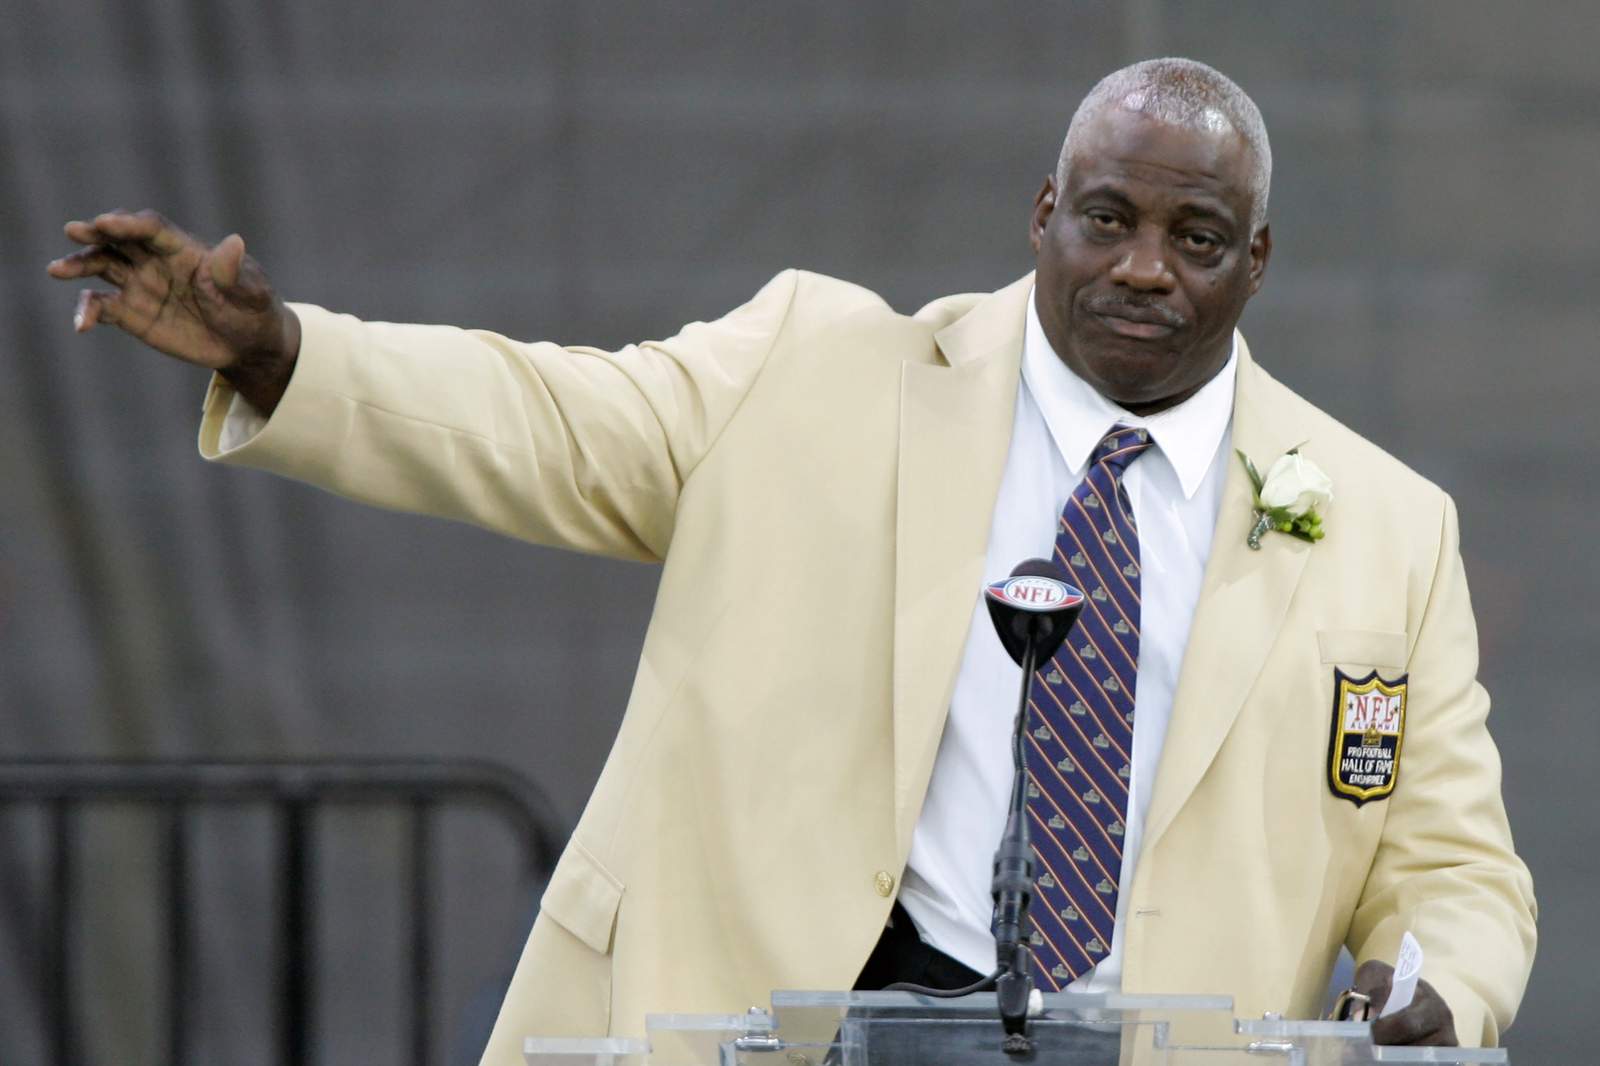 Fred Dean, 68, fearsome pass rusher of 49ers' dynasty, dies